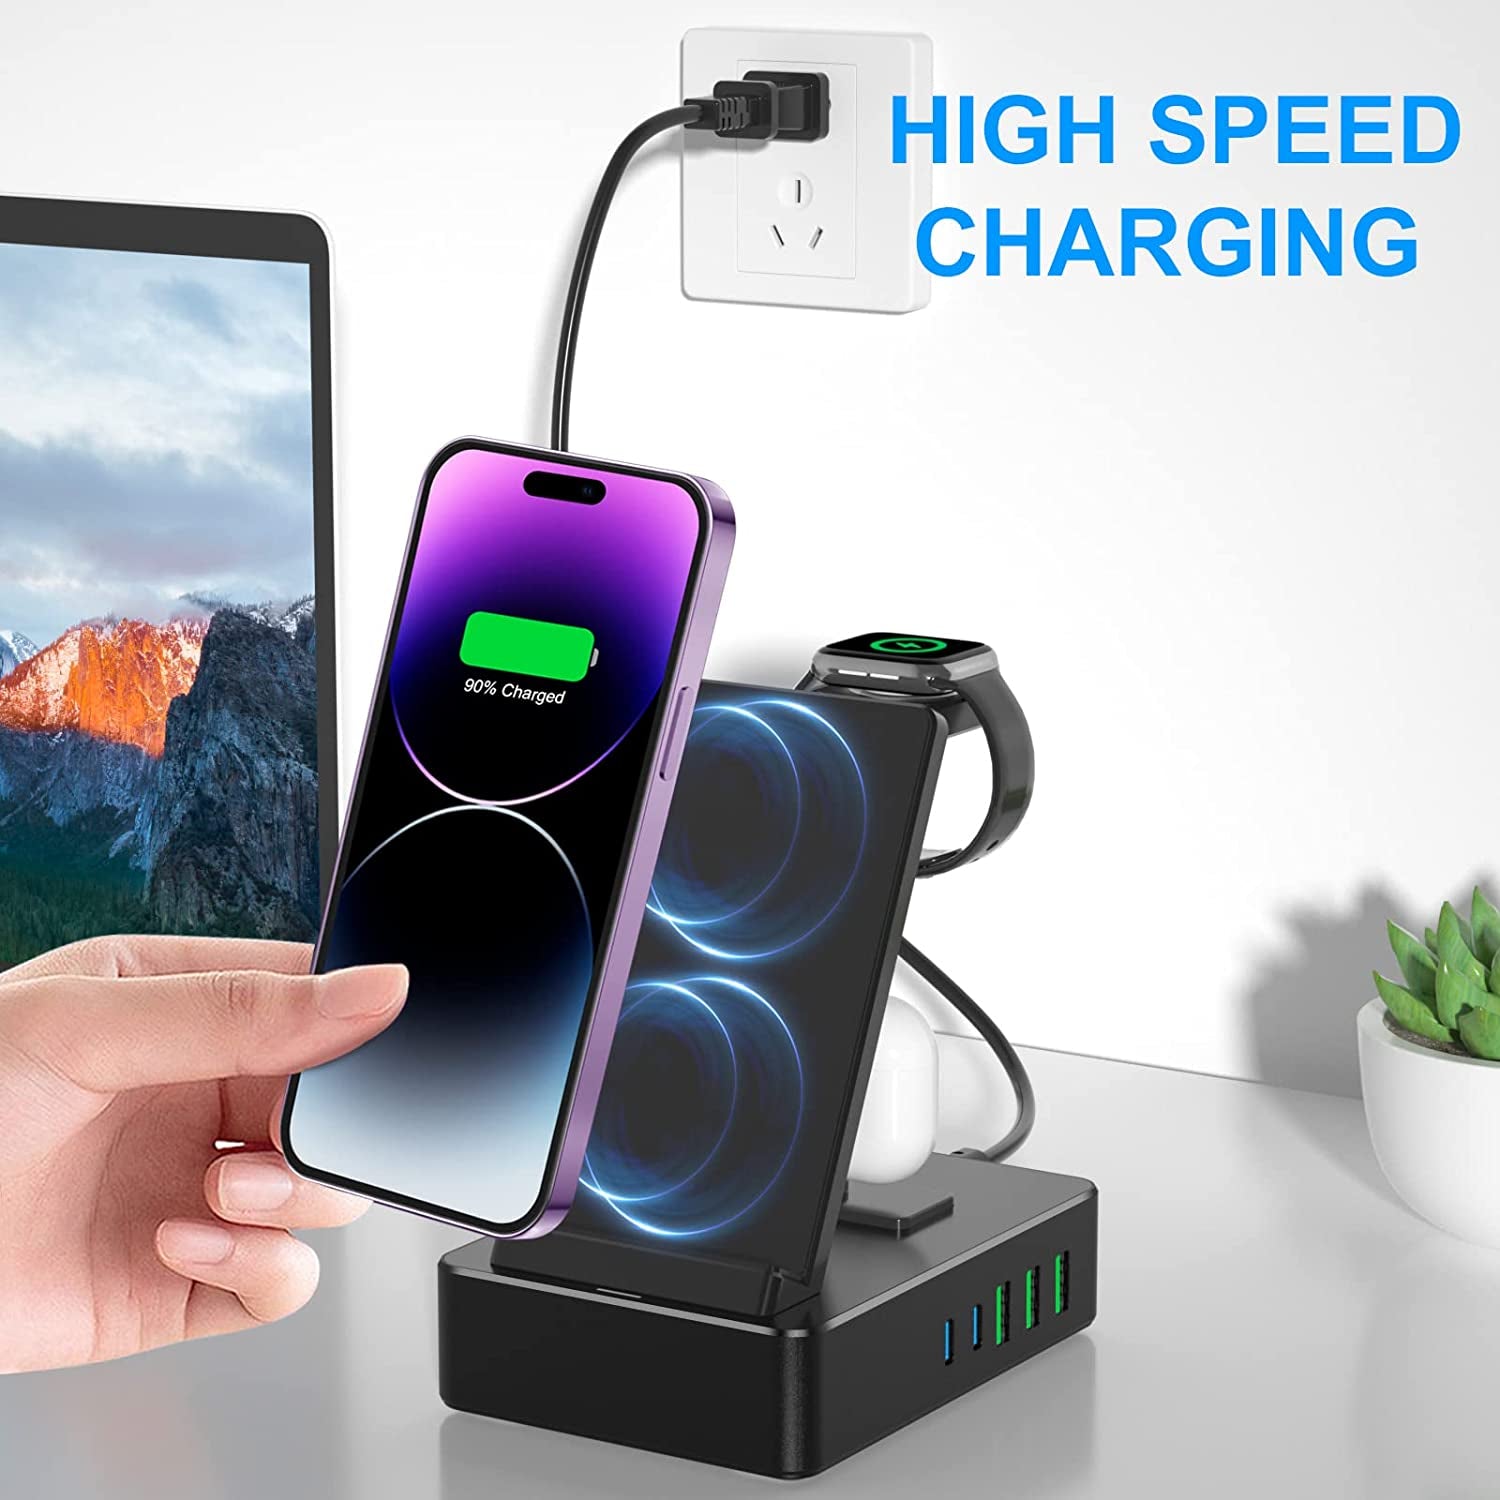  8-in-1 Charging Station: 100W Wireless Charging and 20W USB C 2-Port Apple-Compatible Docking Station for Multiple Devices - iPhone Series, Apple Watch, AirPods Pro